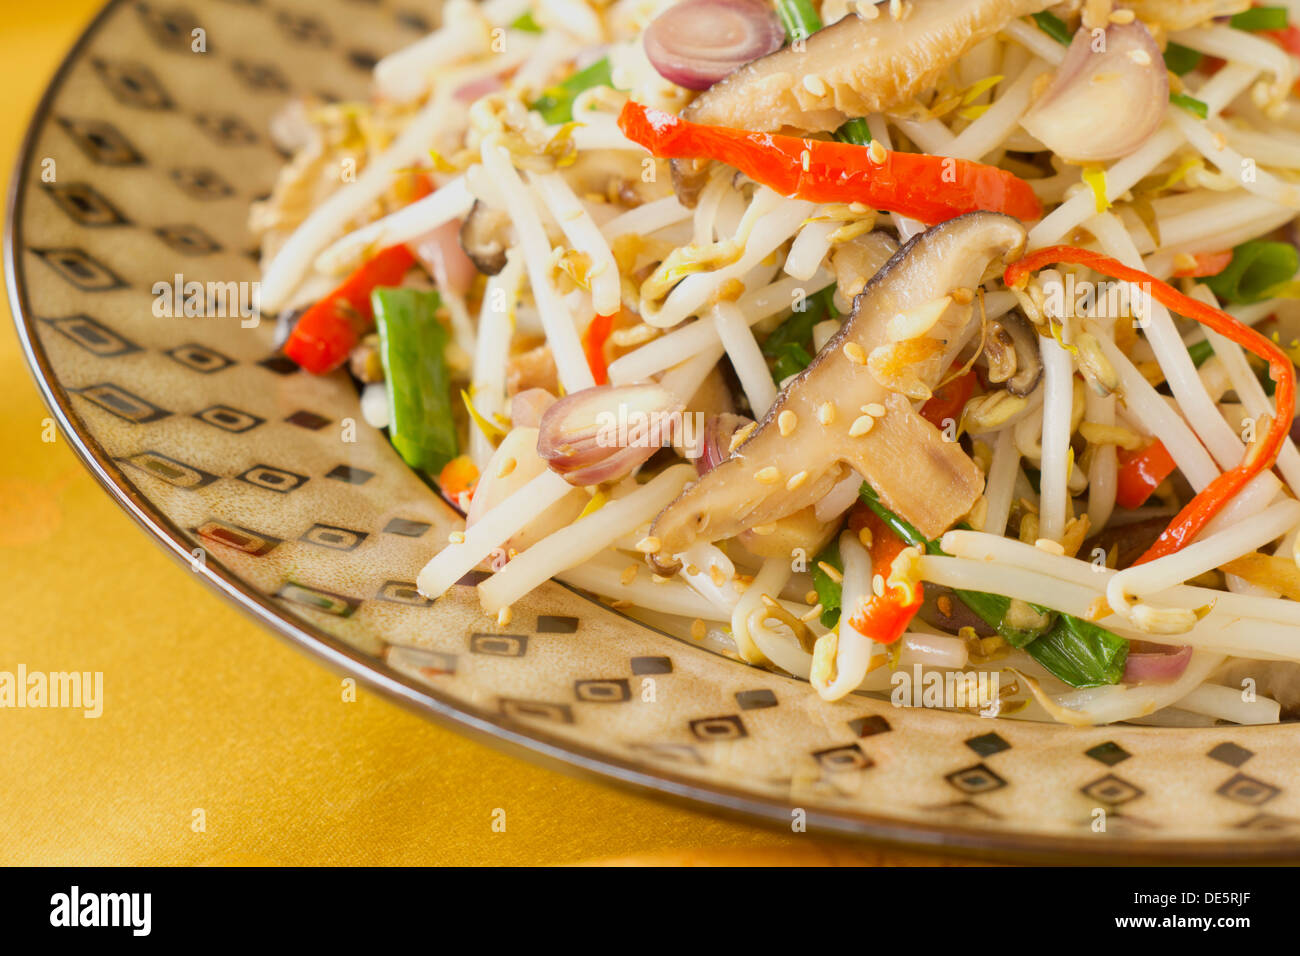 Stir Fried Mung Bean Sprouts w Dried Shrimps Non sharpen file Stock Photo